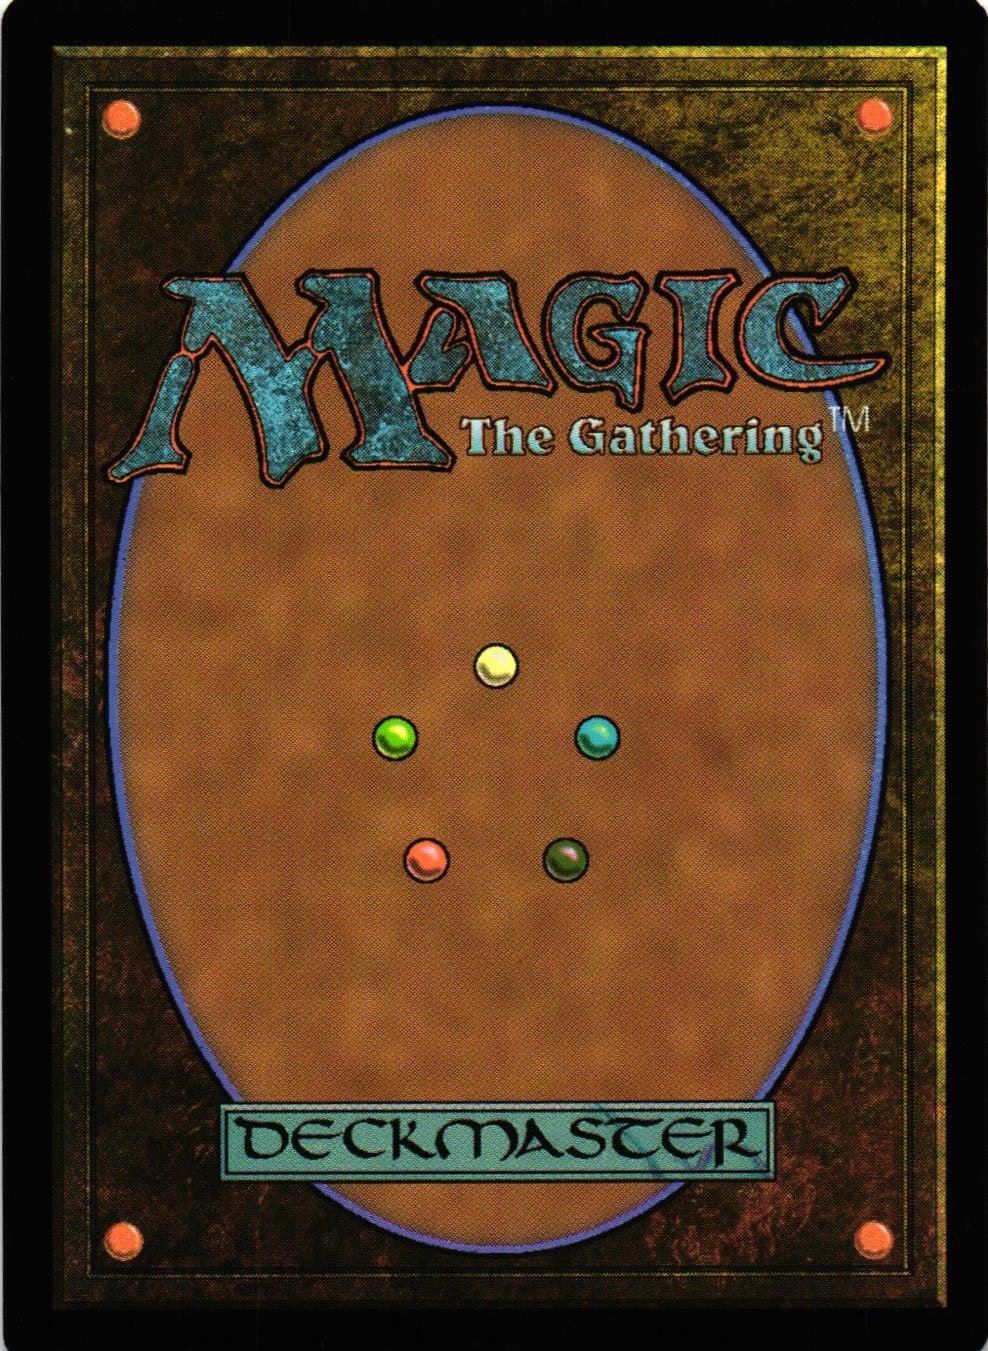 Gurmag Angler Common 072/185 Fate Reforged (FRF) Magic the Gathering